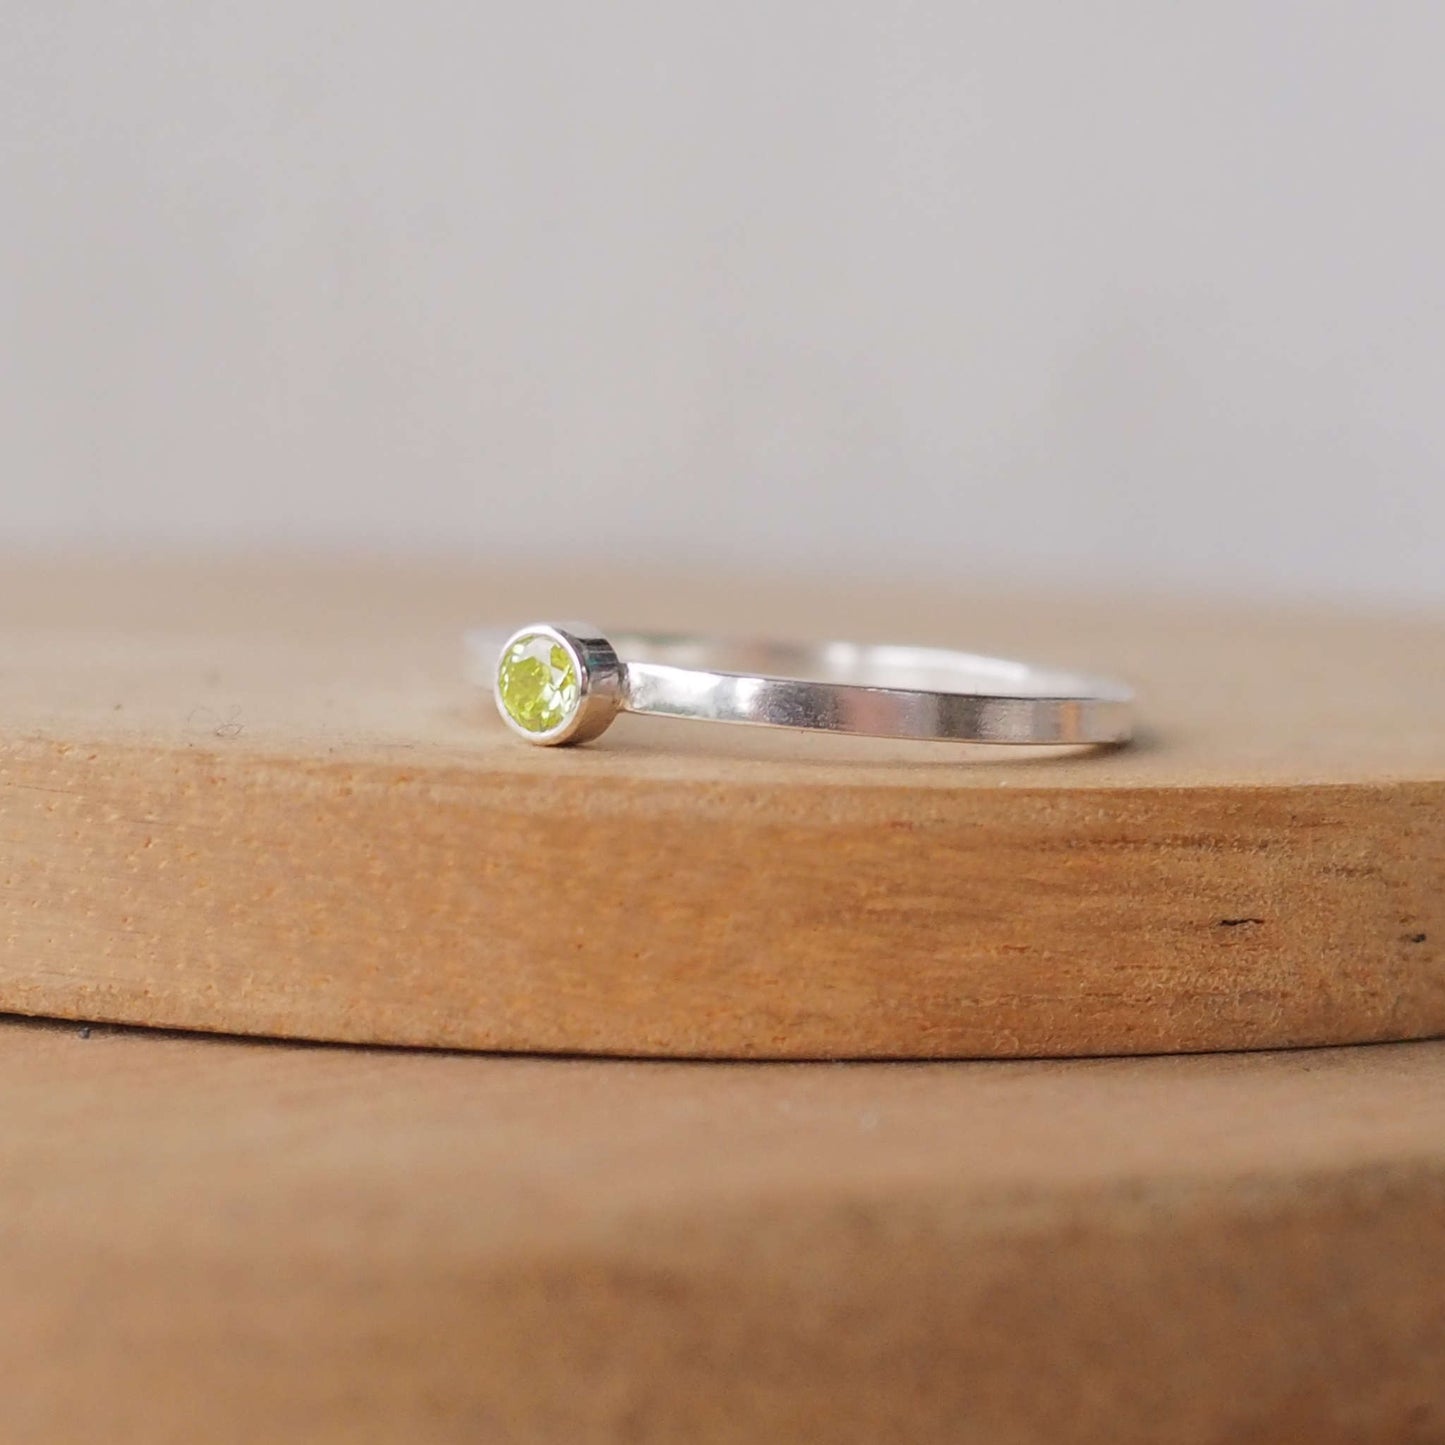 Silver ring with a moss green gemstone. The ring is simple in style with no embellishment , with a round wire band 1.5mm thick with a simple light green Peridot 3mm round cubic zirconia stone set in an enclosed silver setting. Peridot is birthstone for August. The ring is Sterling Silver and made to your ring size. Handmade in Scotland by Maram Jewellery